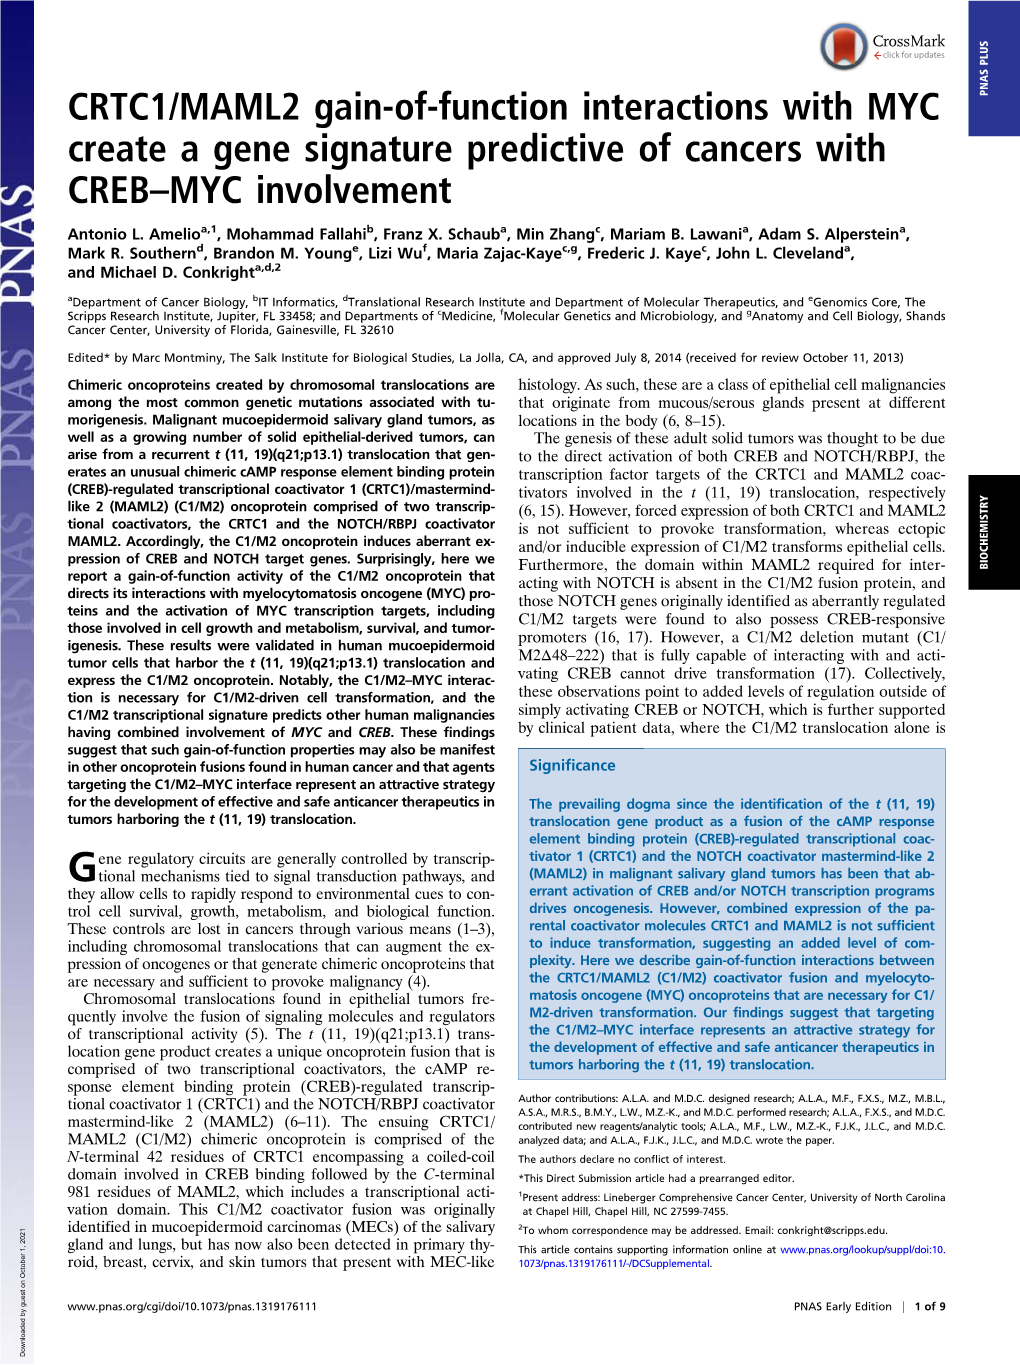 CRTC1/MAML2 Gain-Of-Function Interactions with MYC Create A